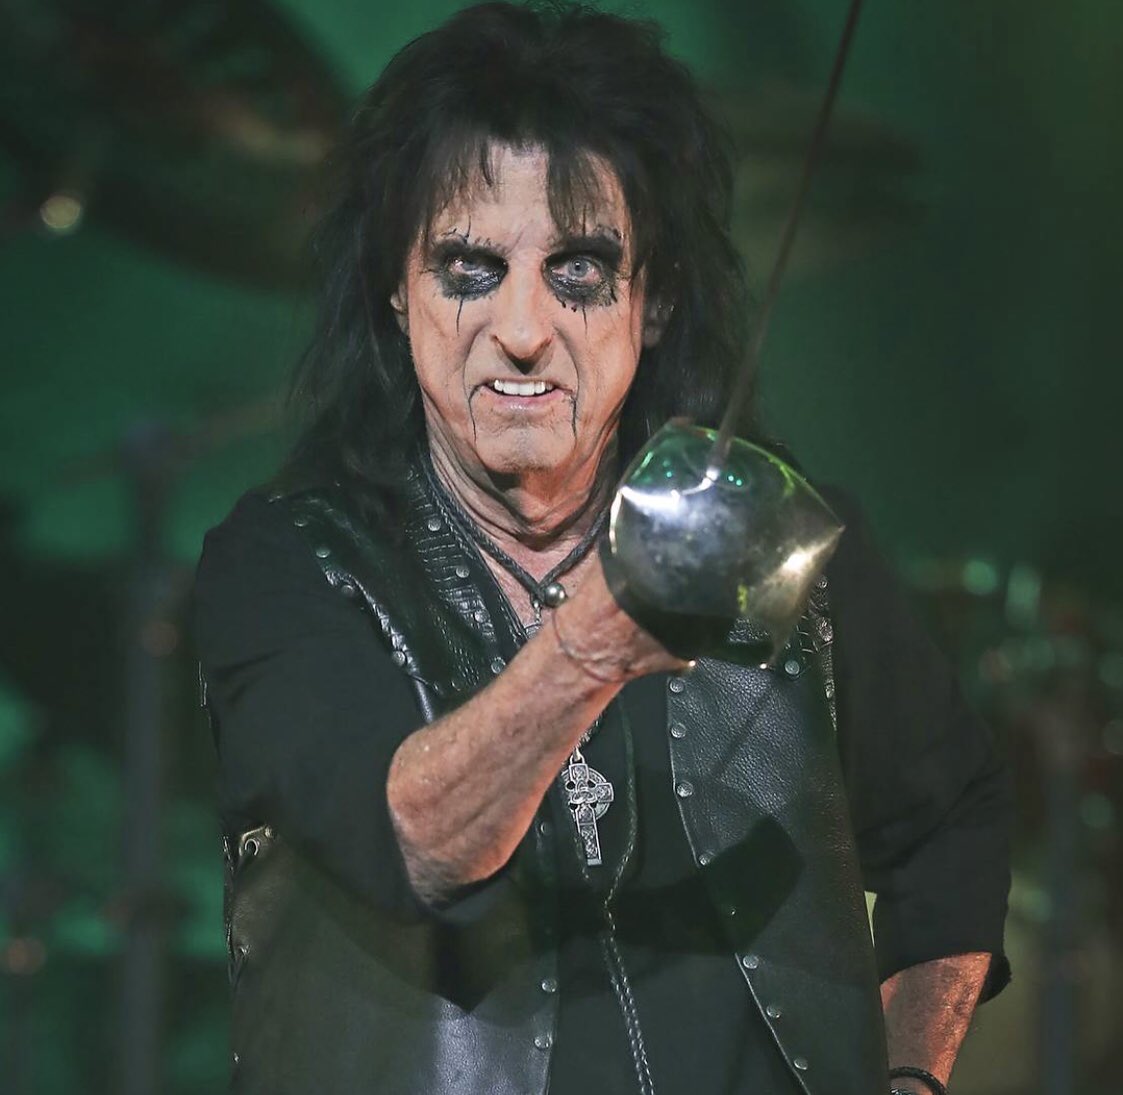 Christine on Twitter: "It was awesome #Alice Cooper https://t.co/9qAfo...